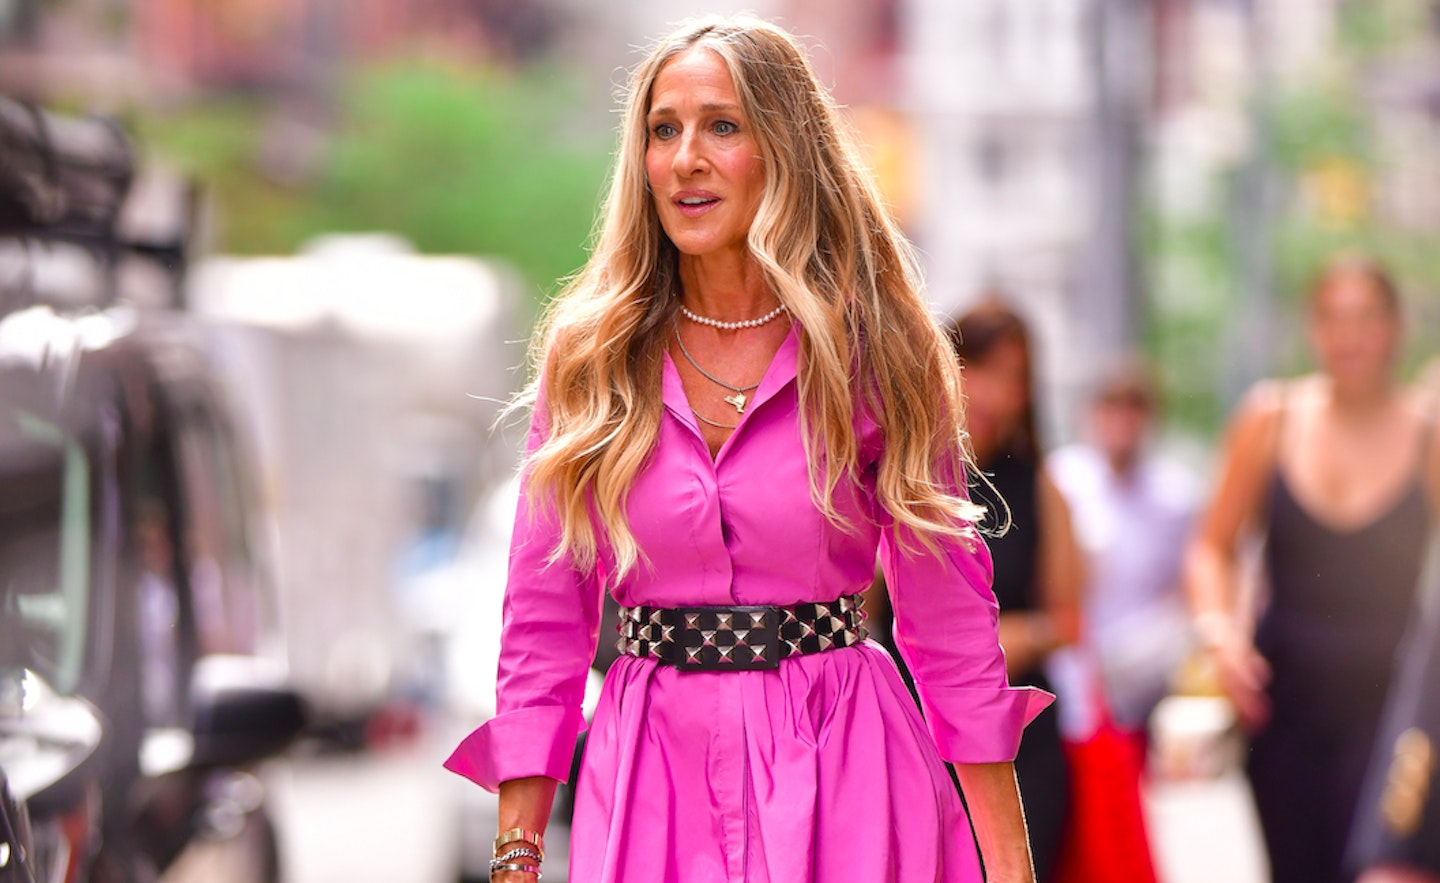 And Just Like That: Carrie Bradshaw's Pink Gingham Dress